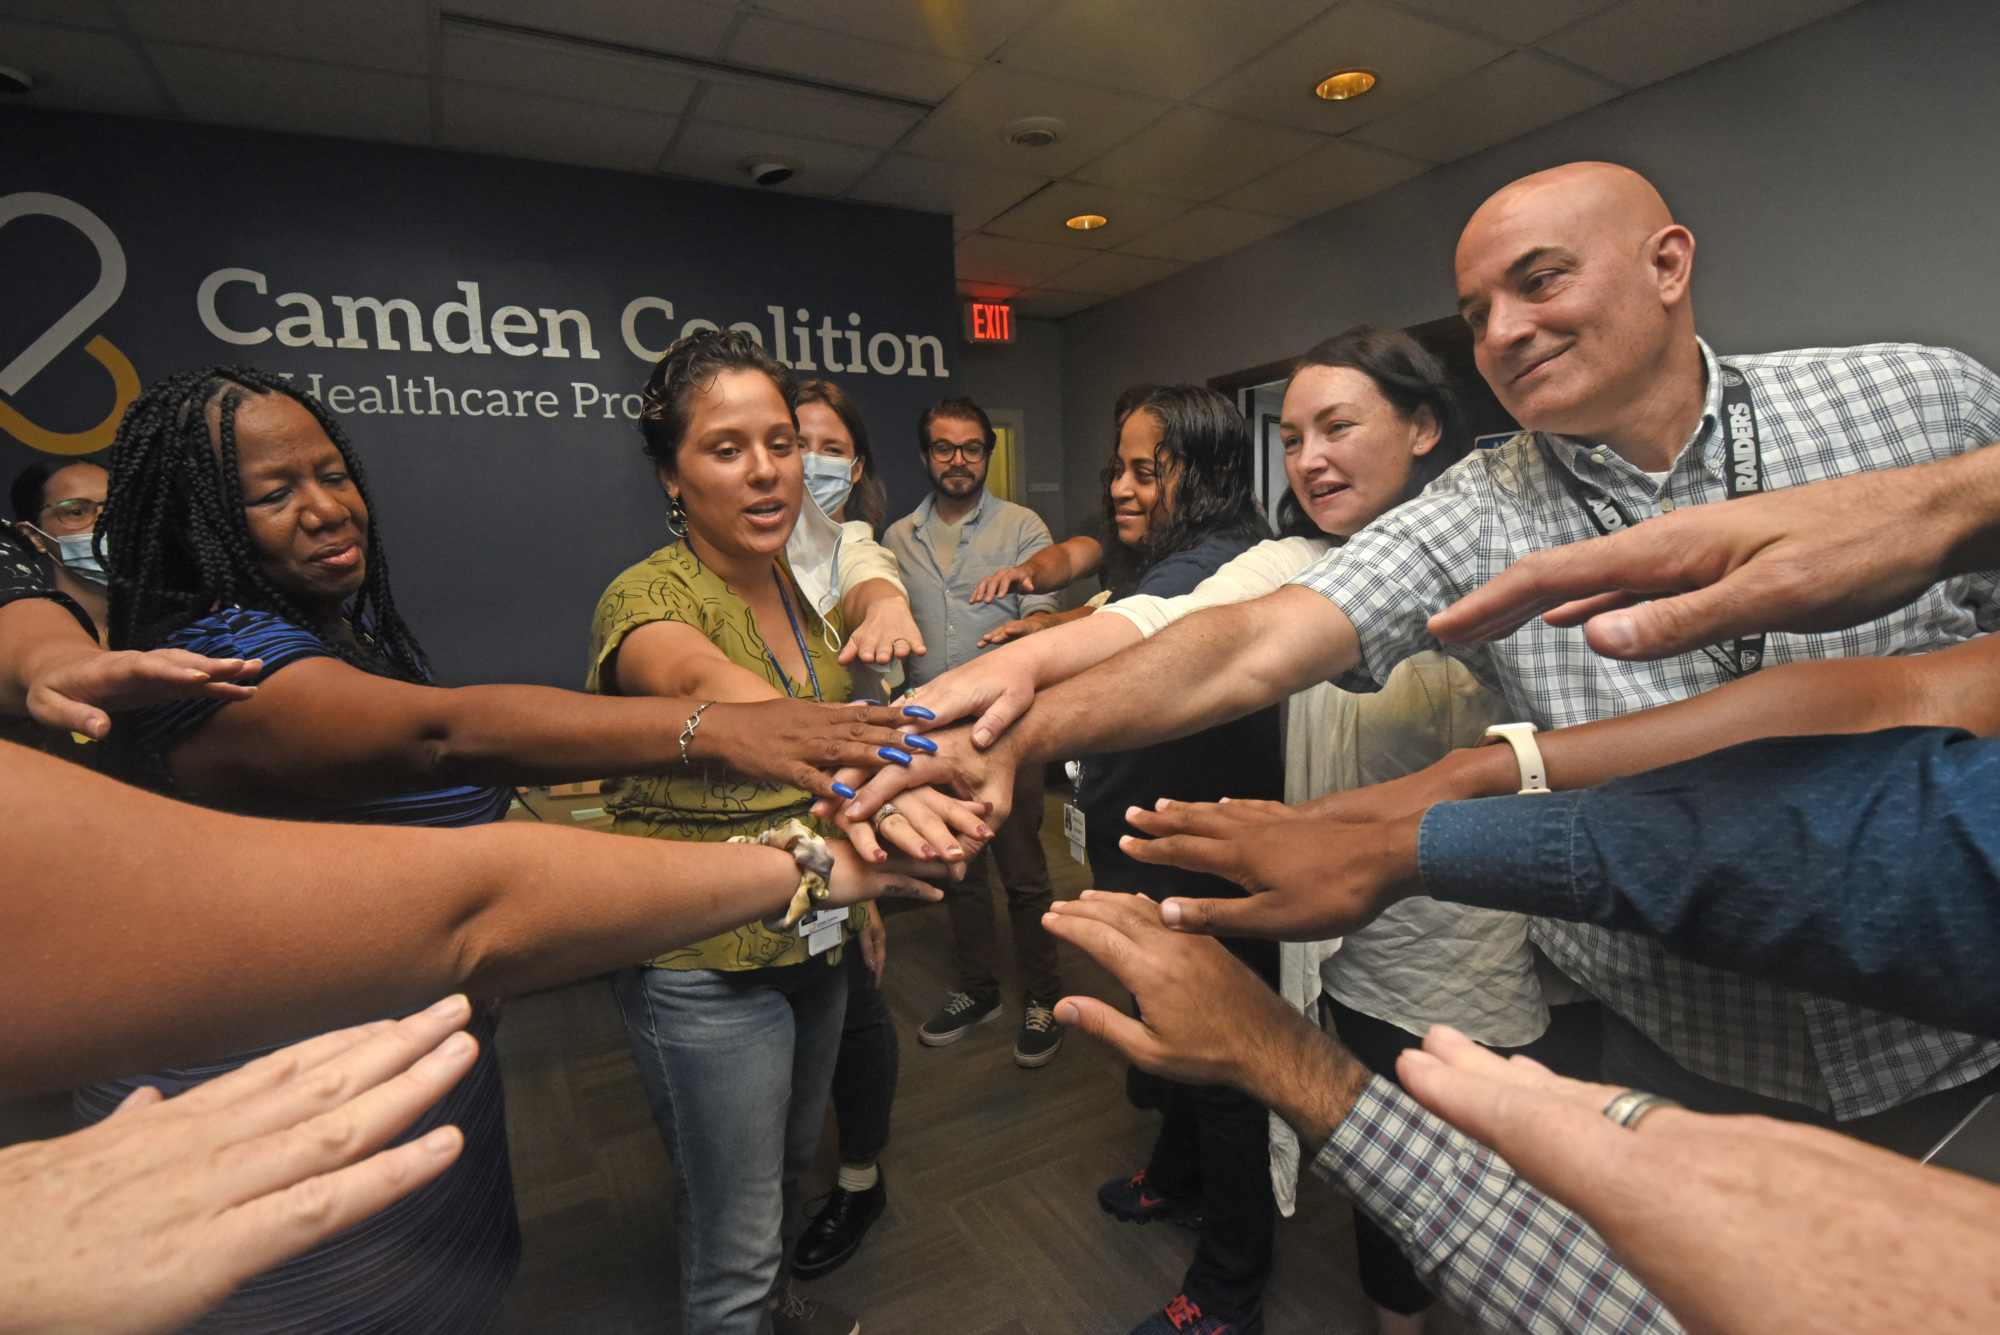 Camden Coalition staff put their hands in the middle for a team huddle